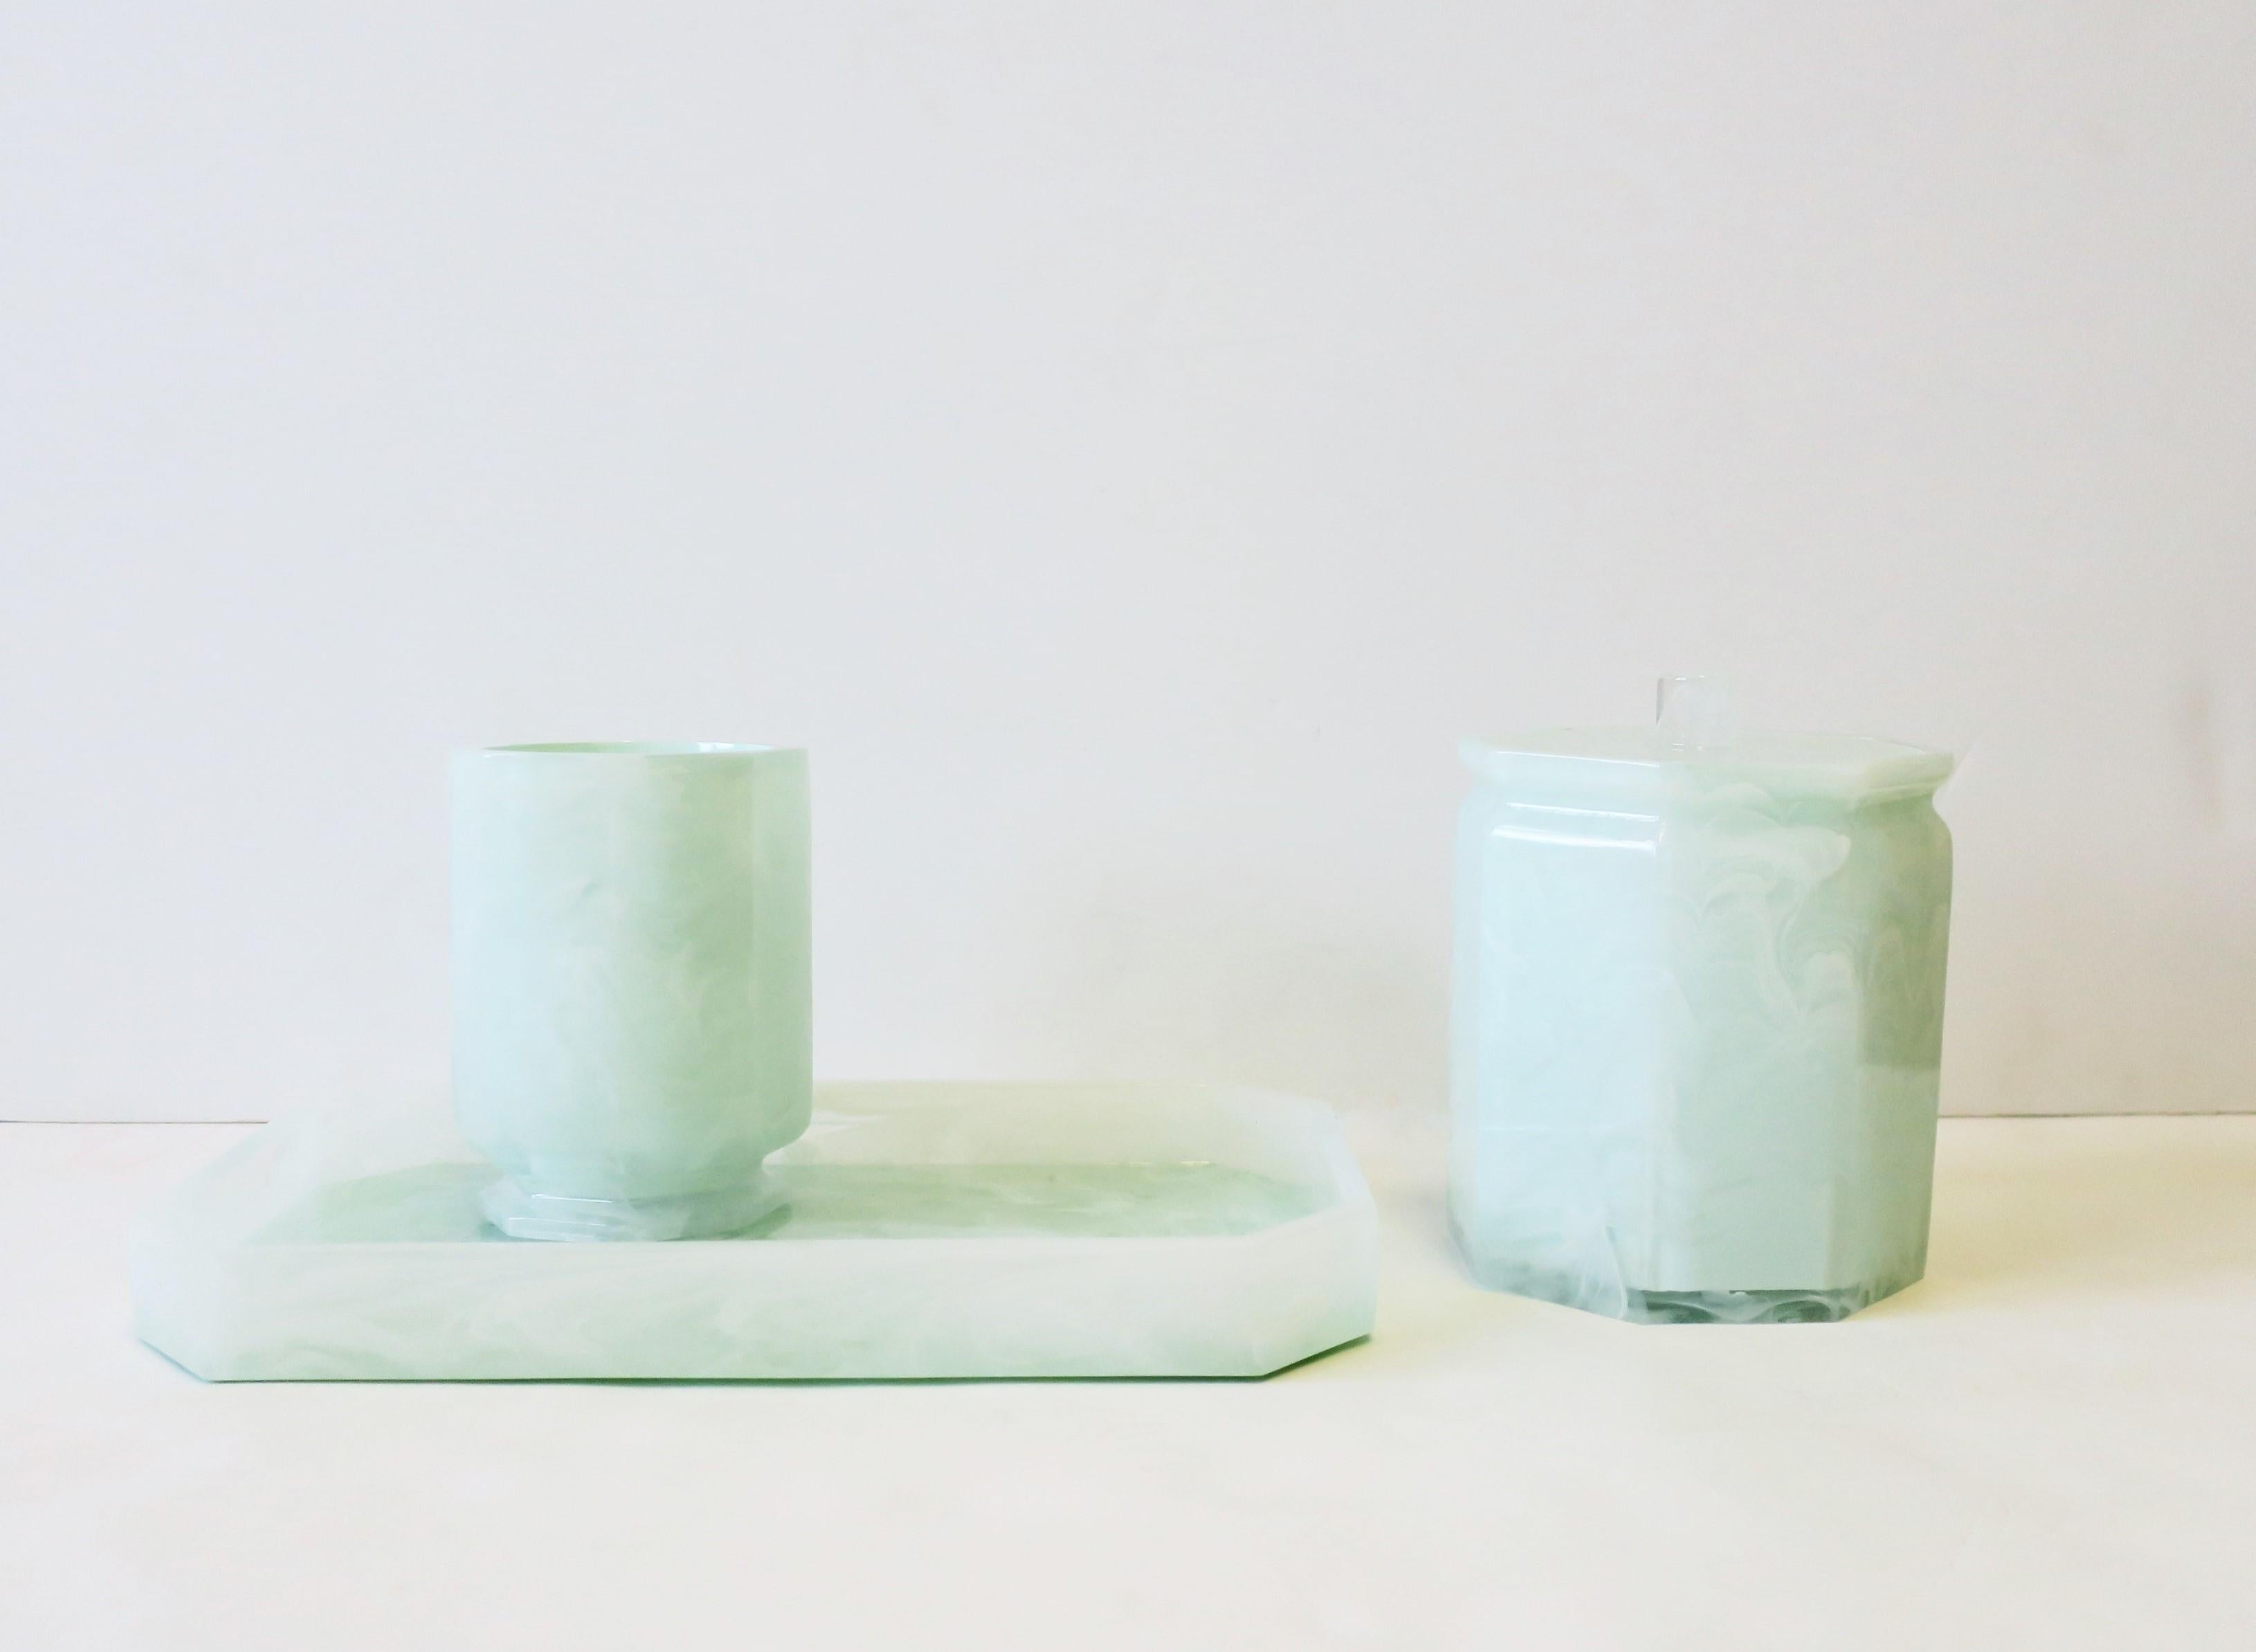 Marble Acrylic Desk or Vanity Tray Box Set in White and Mint Green 10